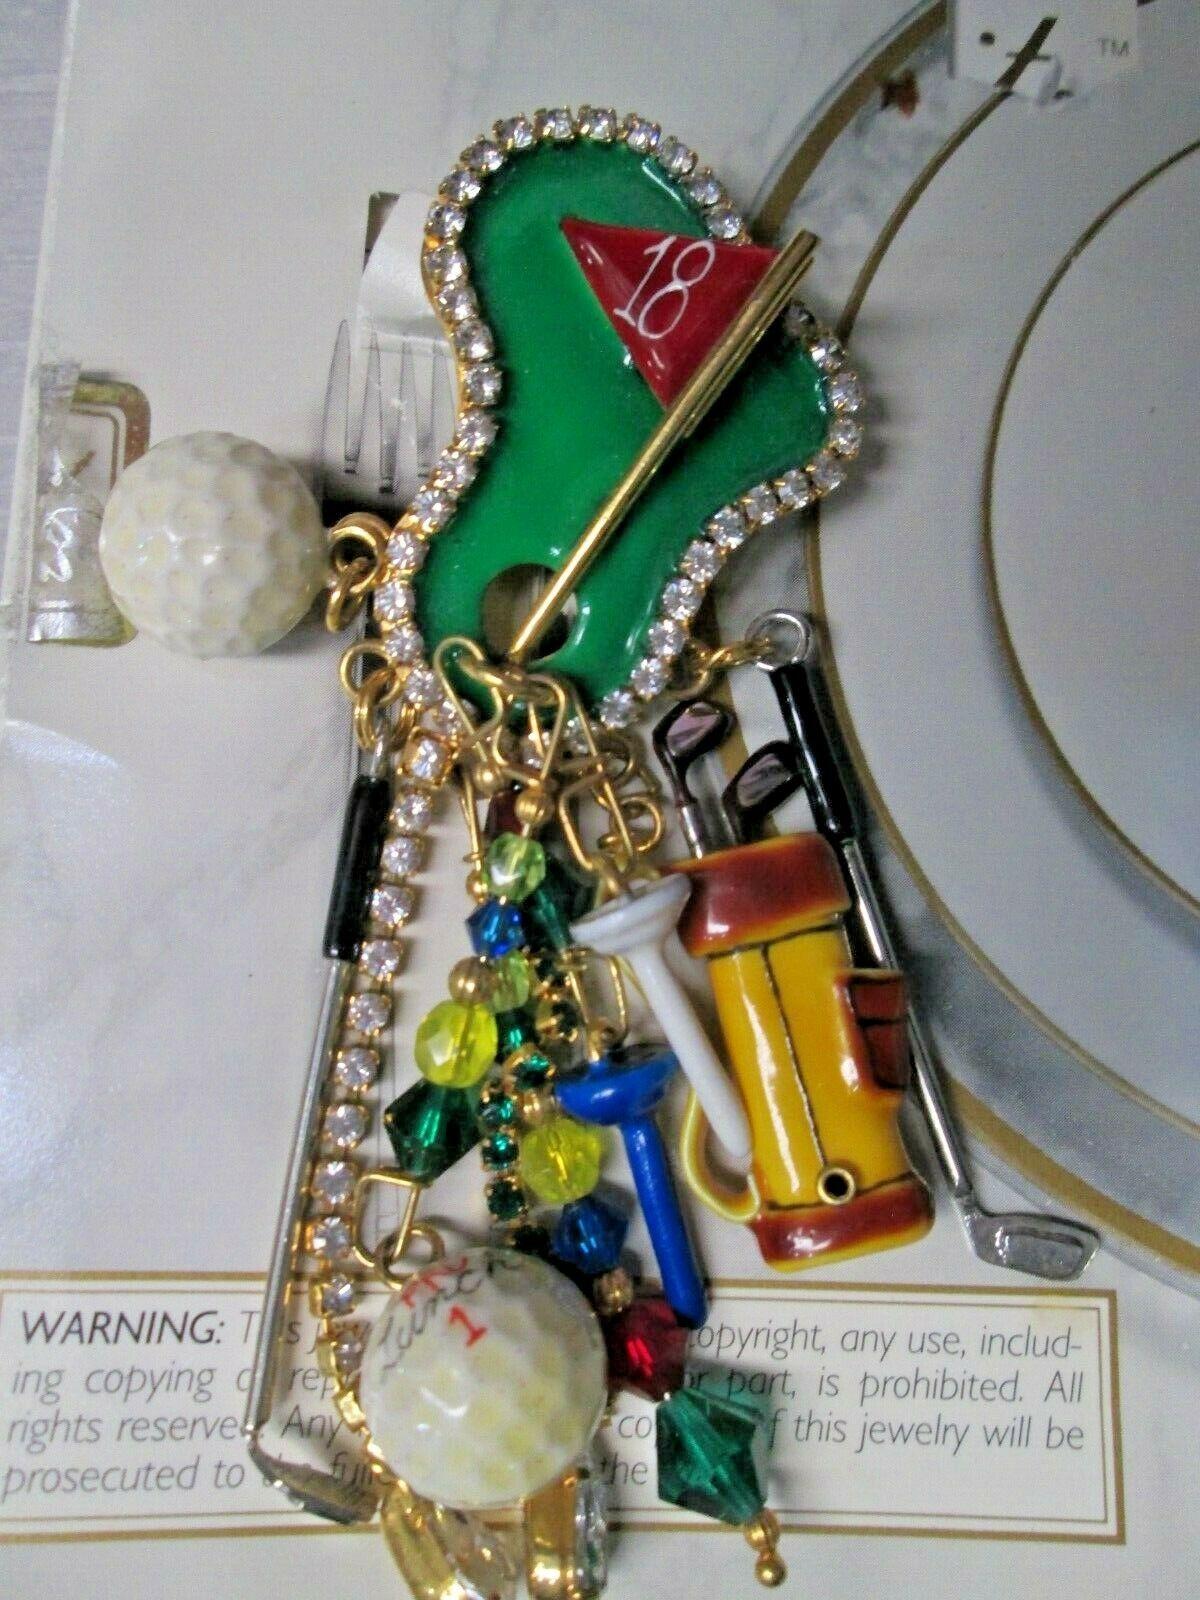 Simply Awesome! Large Enamel Multi Charm 18th Hole Golf Themed Designer Brooch signed: LUNCH AT THE RITZ. This “Golf Enthusiast” Brooch epitomizes Vintage charm with personality! Measuring approx. 4” long. More Beautiful in real time! Sure to be